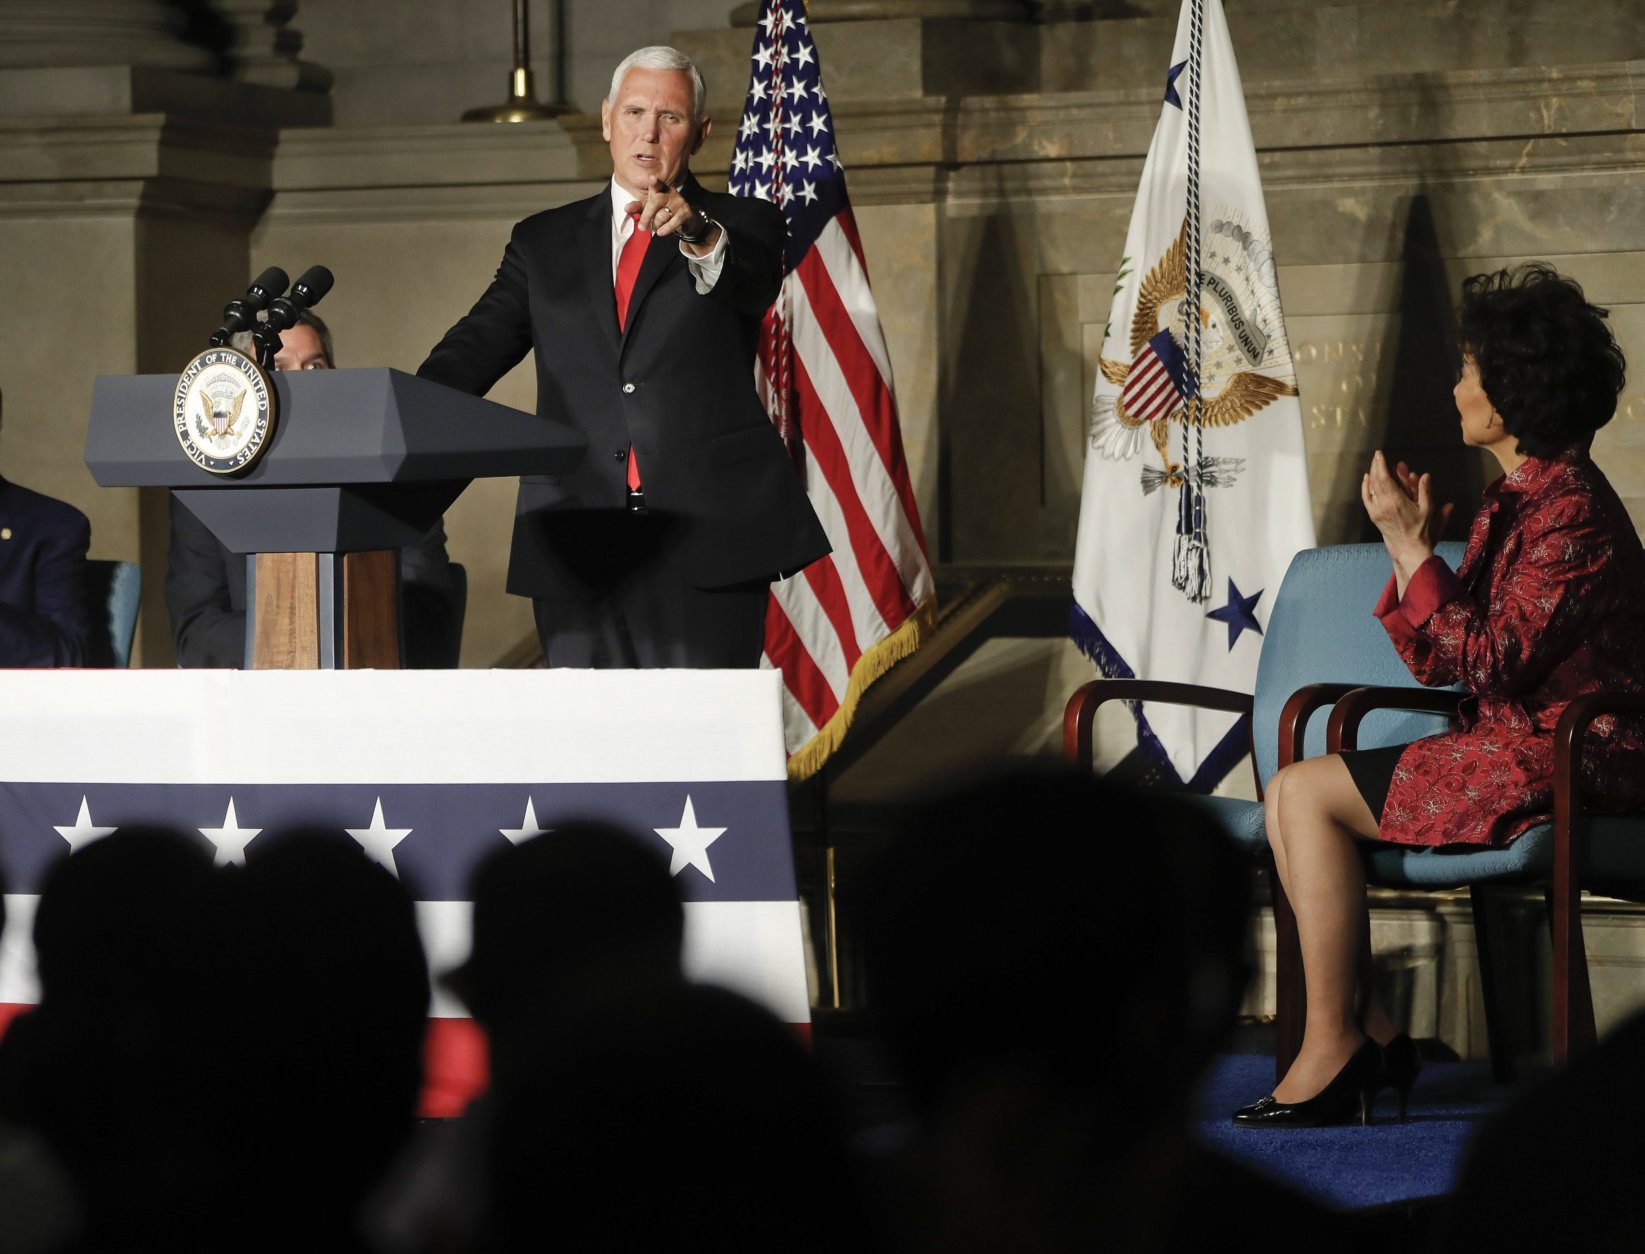 Vice President Mike Pence, points to new naturalized citizens while speaking at a naturalization ceremony in celebration of Independence Day at the National Archives in Washington, Thursday, July 4, 2019. Also on stage is Secretary of Transportation Elaine Chao, right seated. (AP Photo/Pablo Martinez Monsivais)